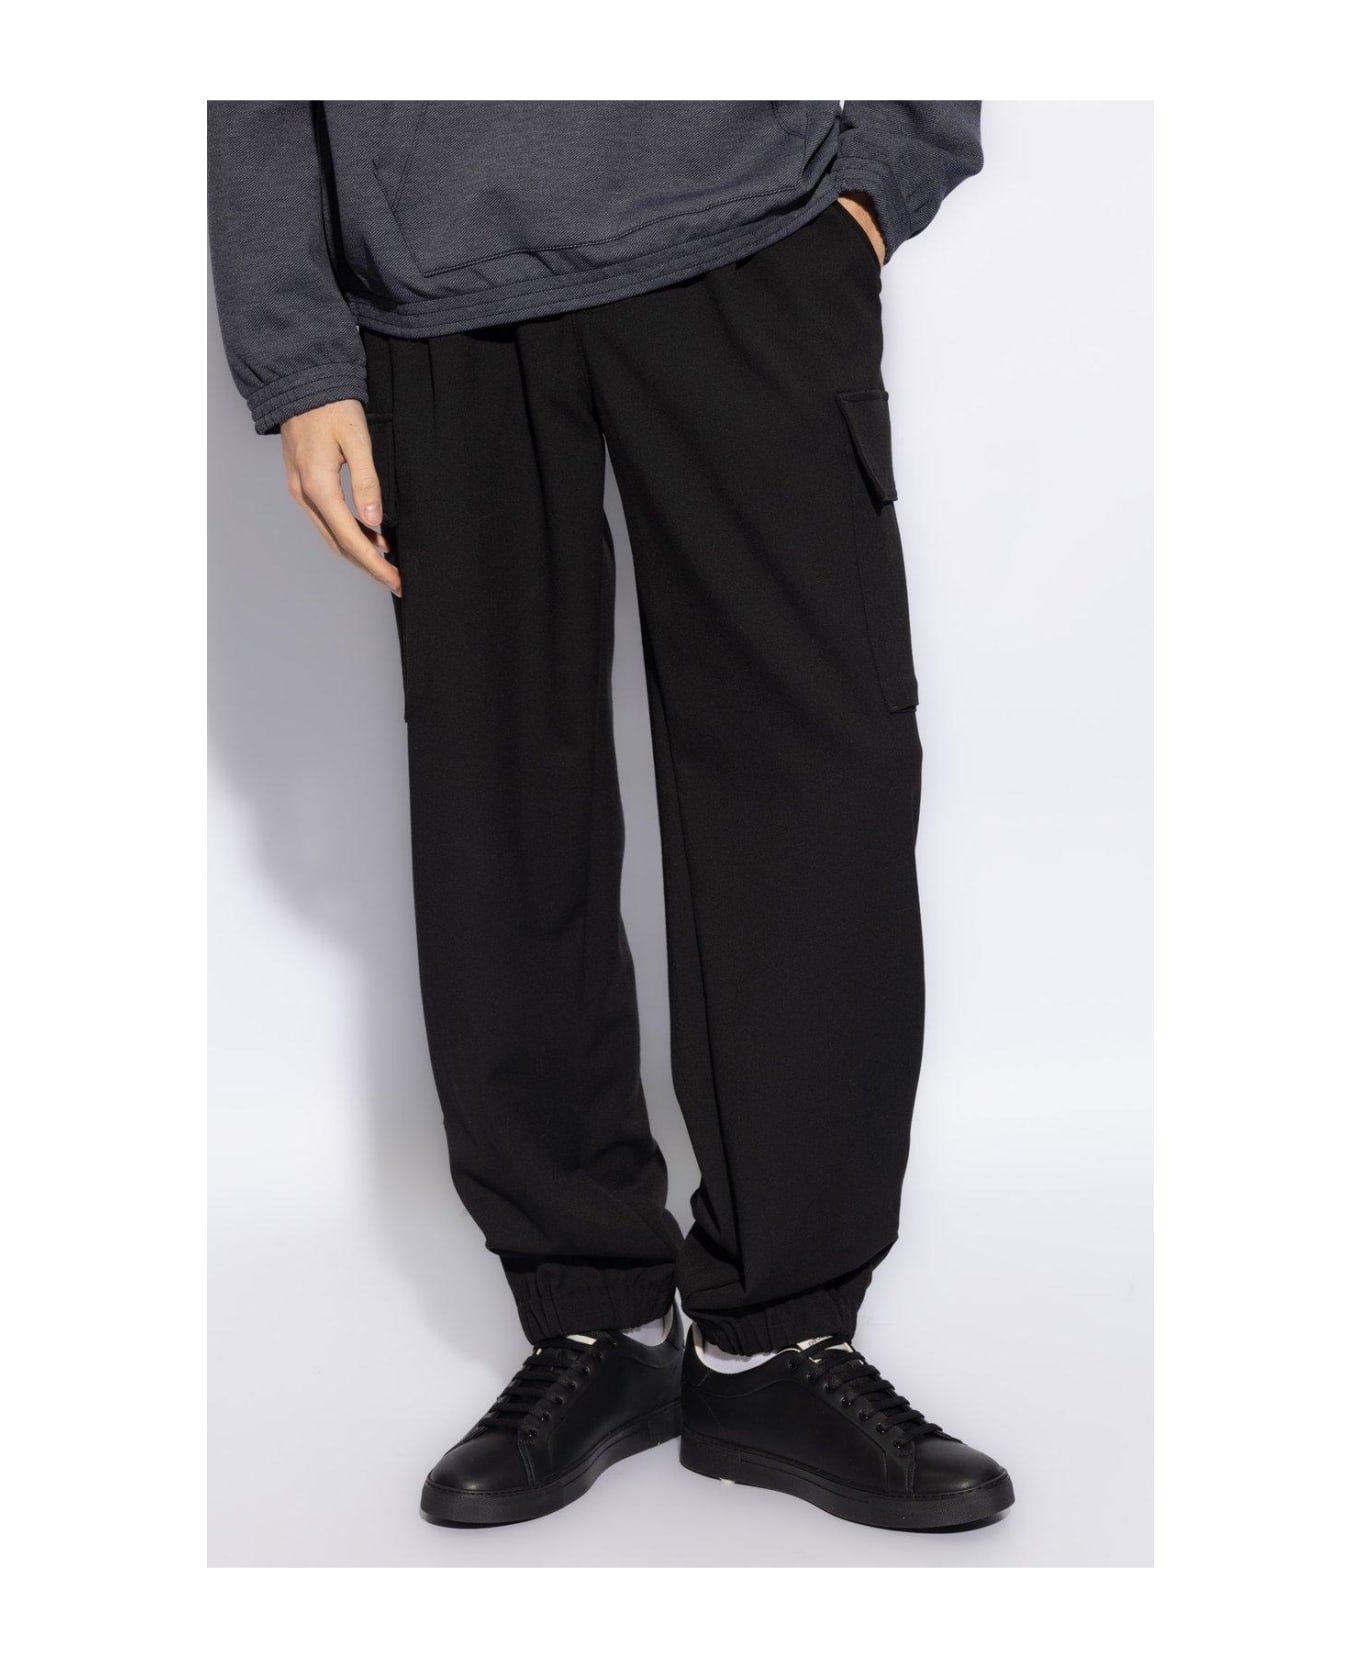 Emporio Armani Trousers With Pockets - Black